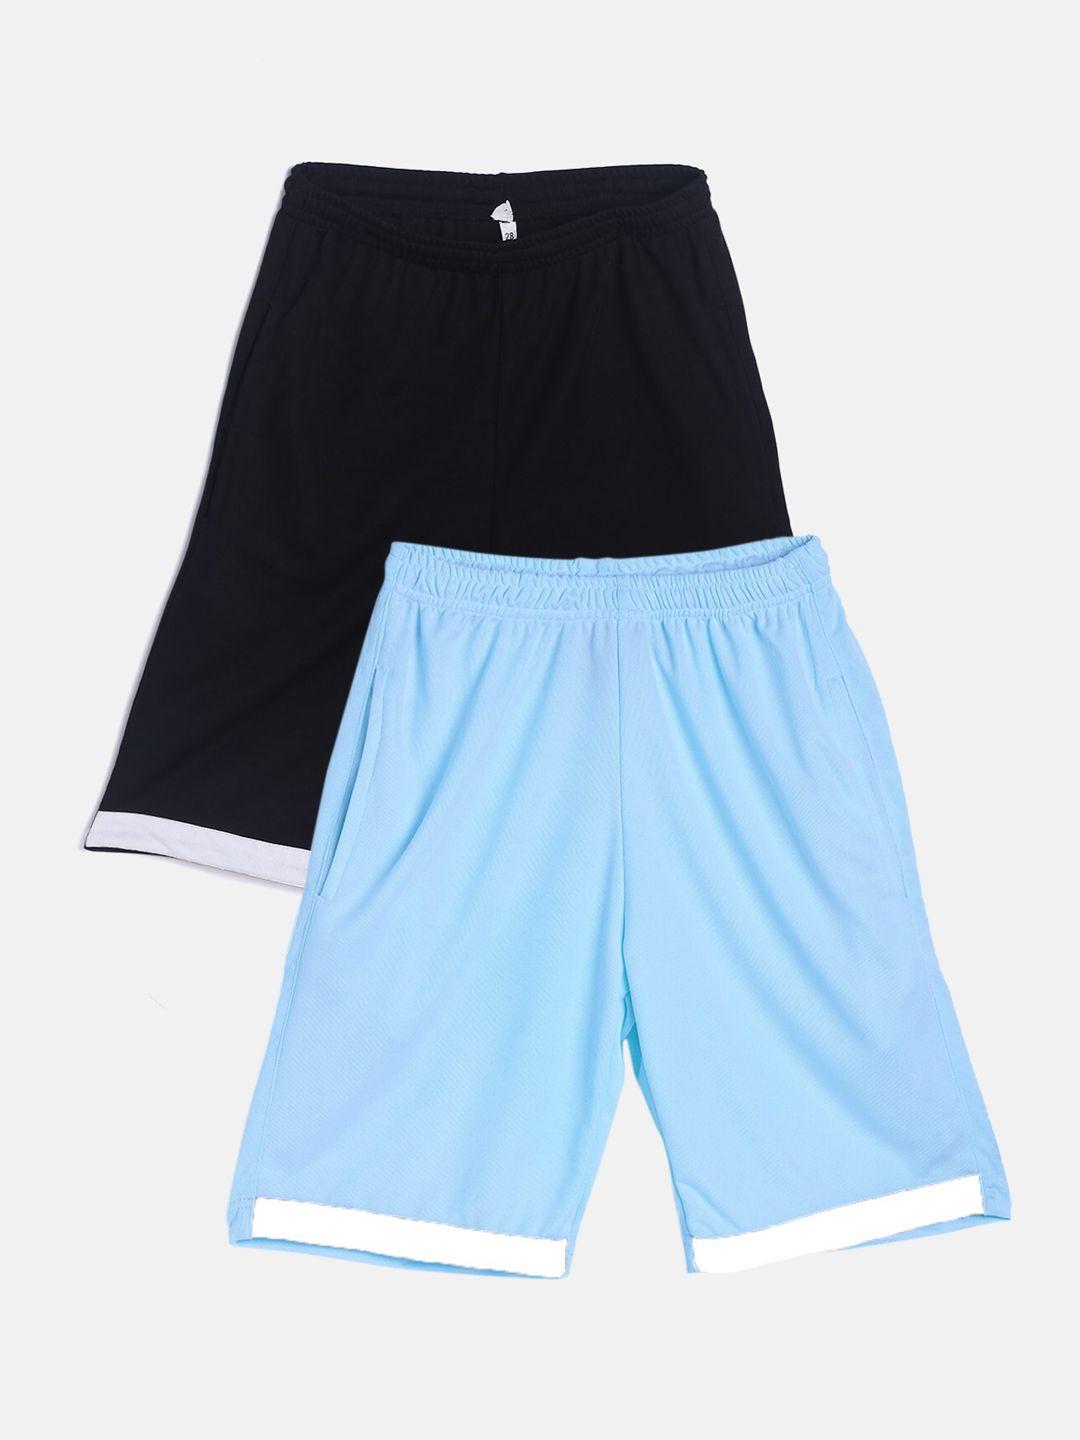 tiny hug boys pack of 2 black and blue high-rise outdoor sports shorts